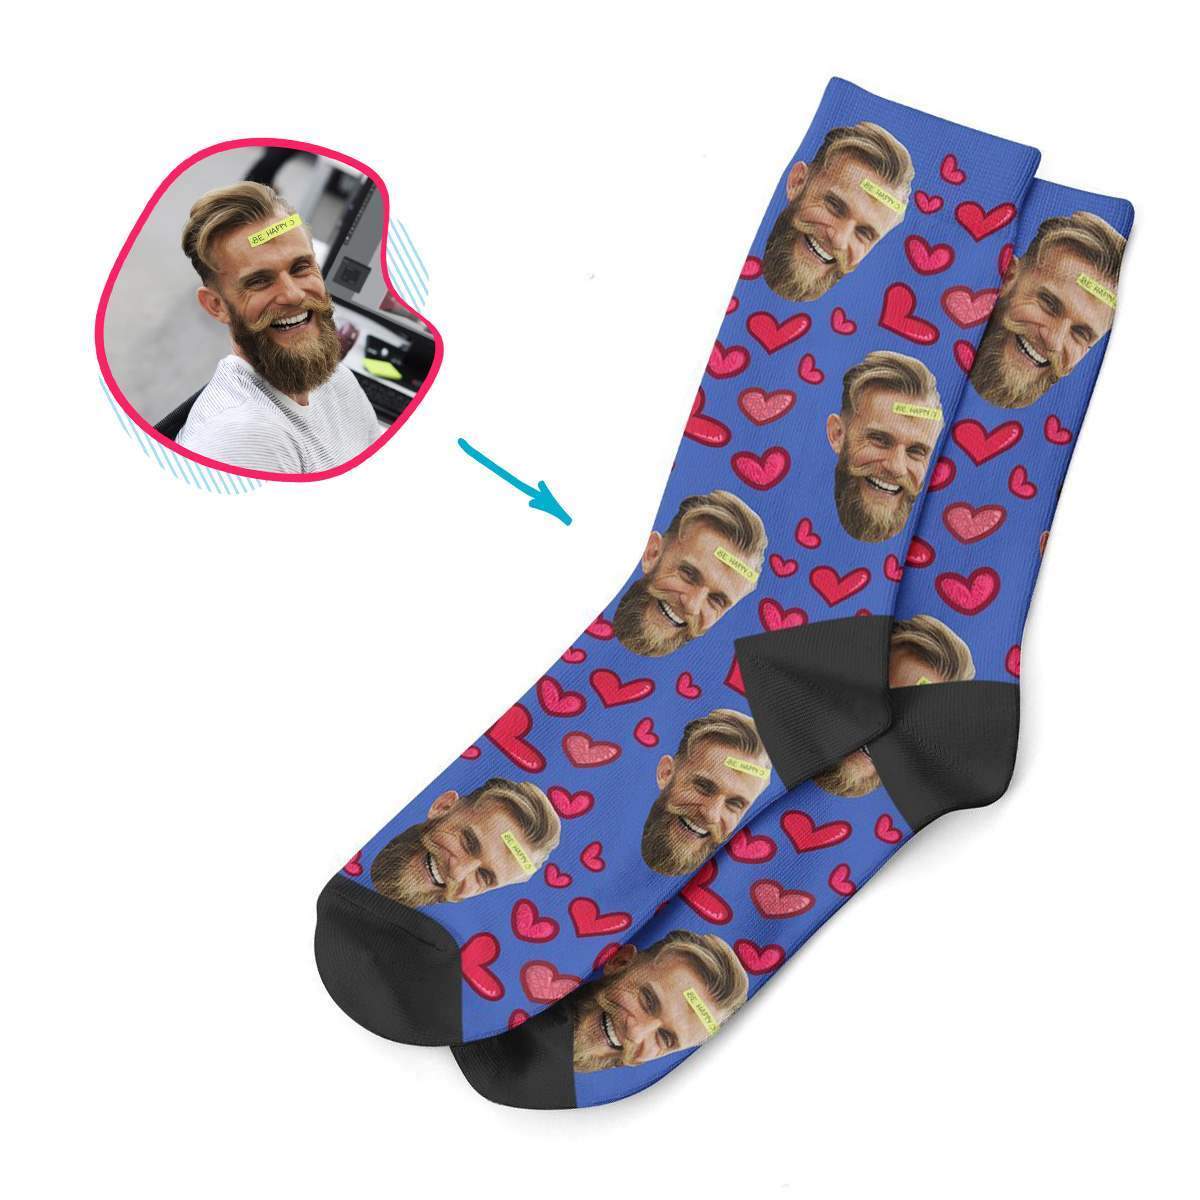 darkblue Heart socks personalized with photo of face printed on them